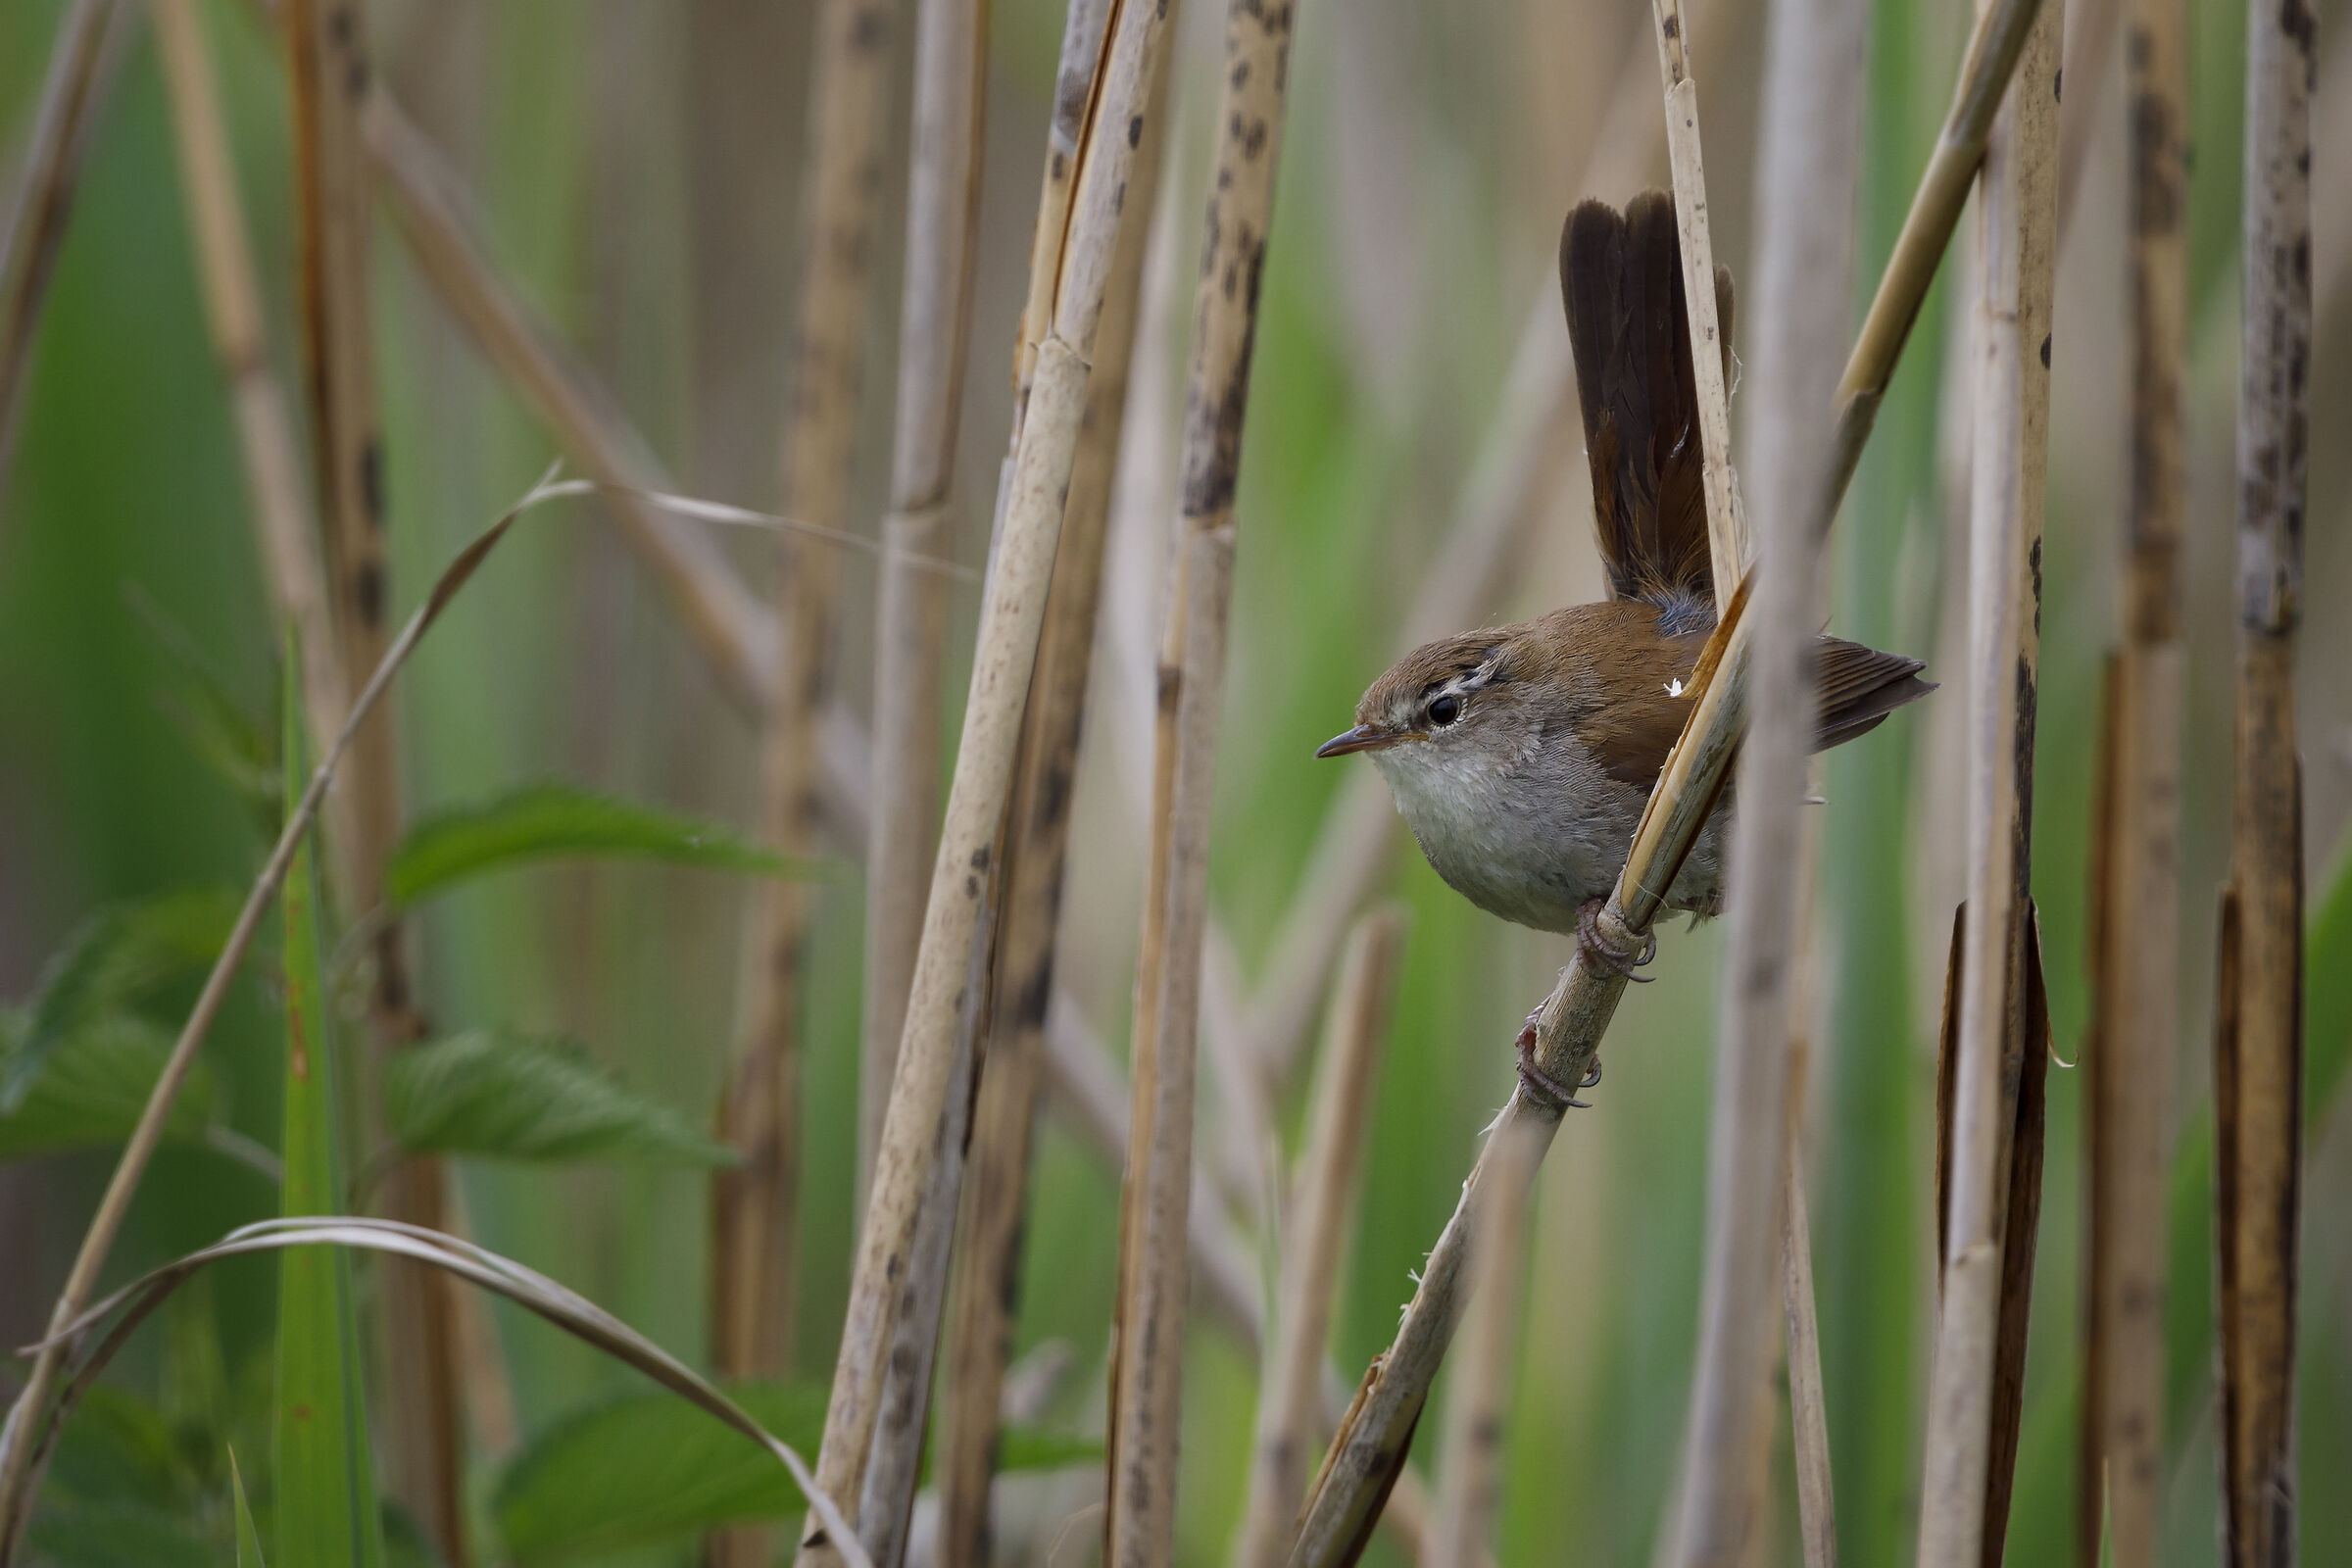 That's who sings among the reeds!...